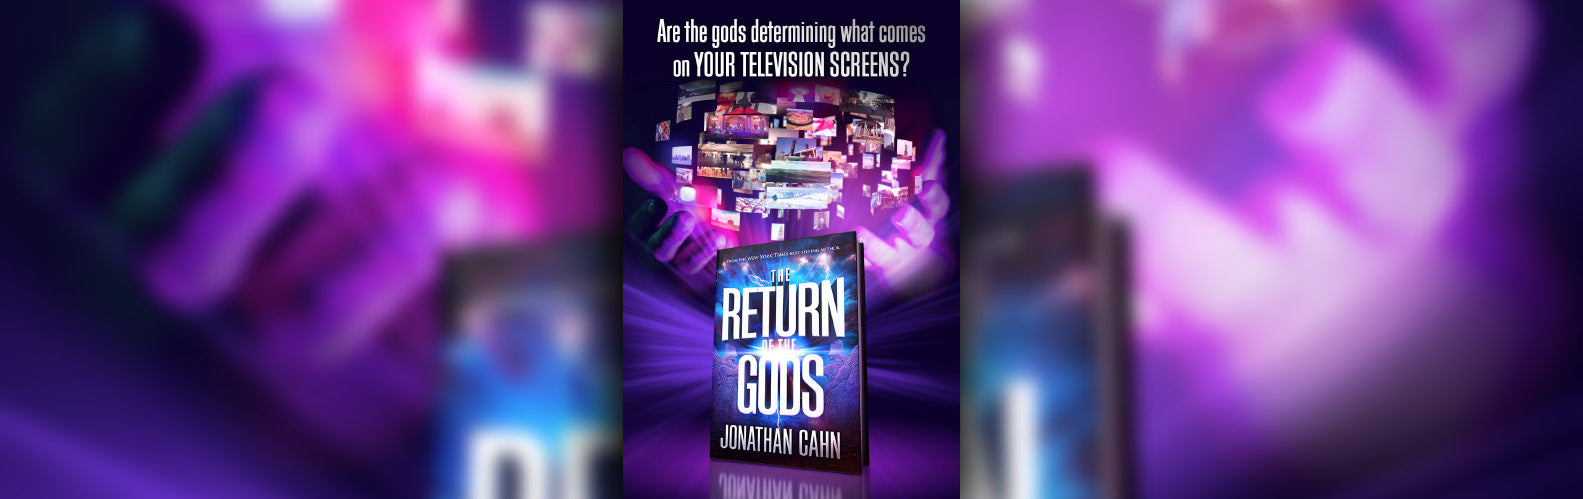 The rise of the ‘bull’ in America; Jonathan Cahn’s latest bestseller ‘The Return of the Gods’ outlines the rise of the Dark Trinity — and what’s to come